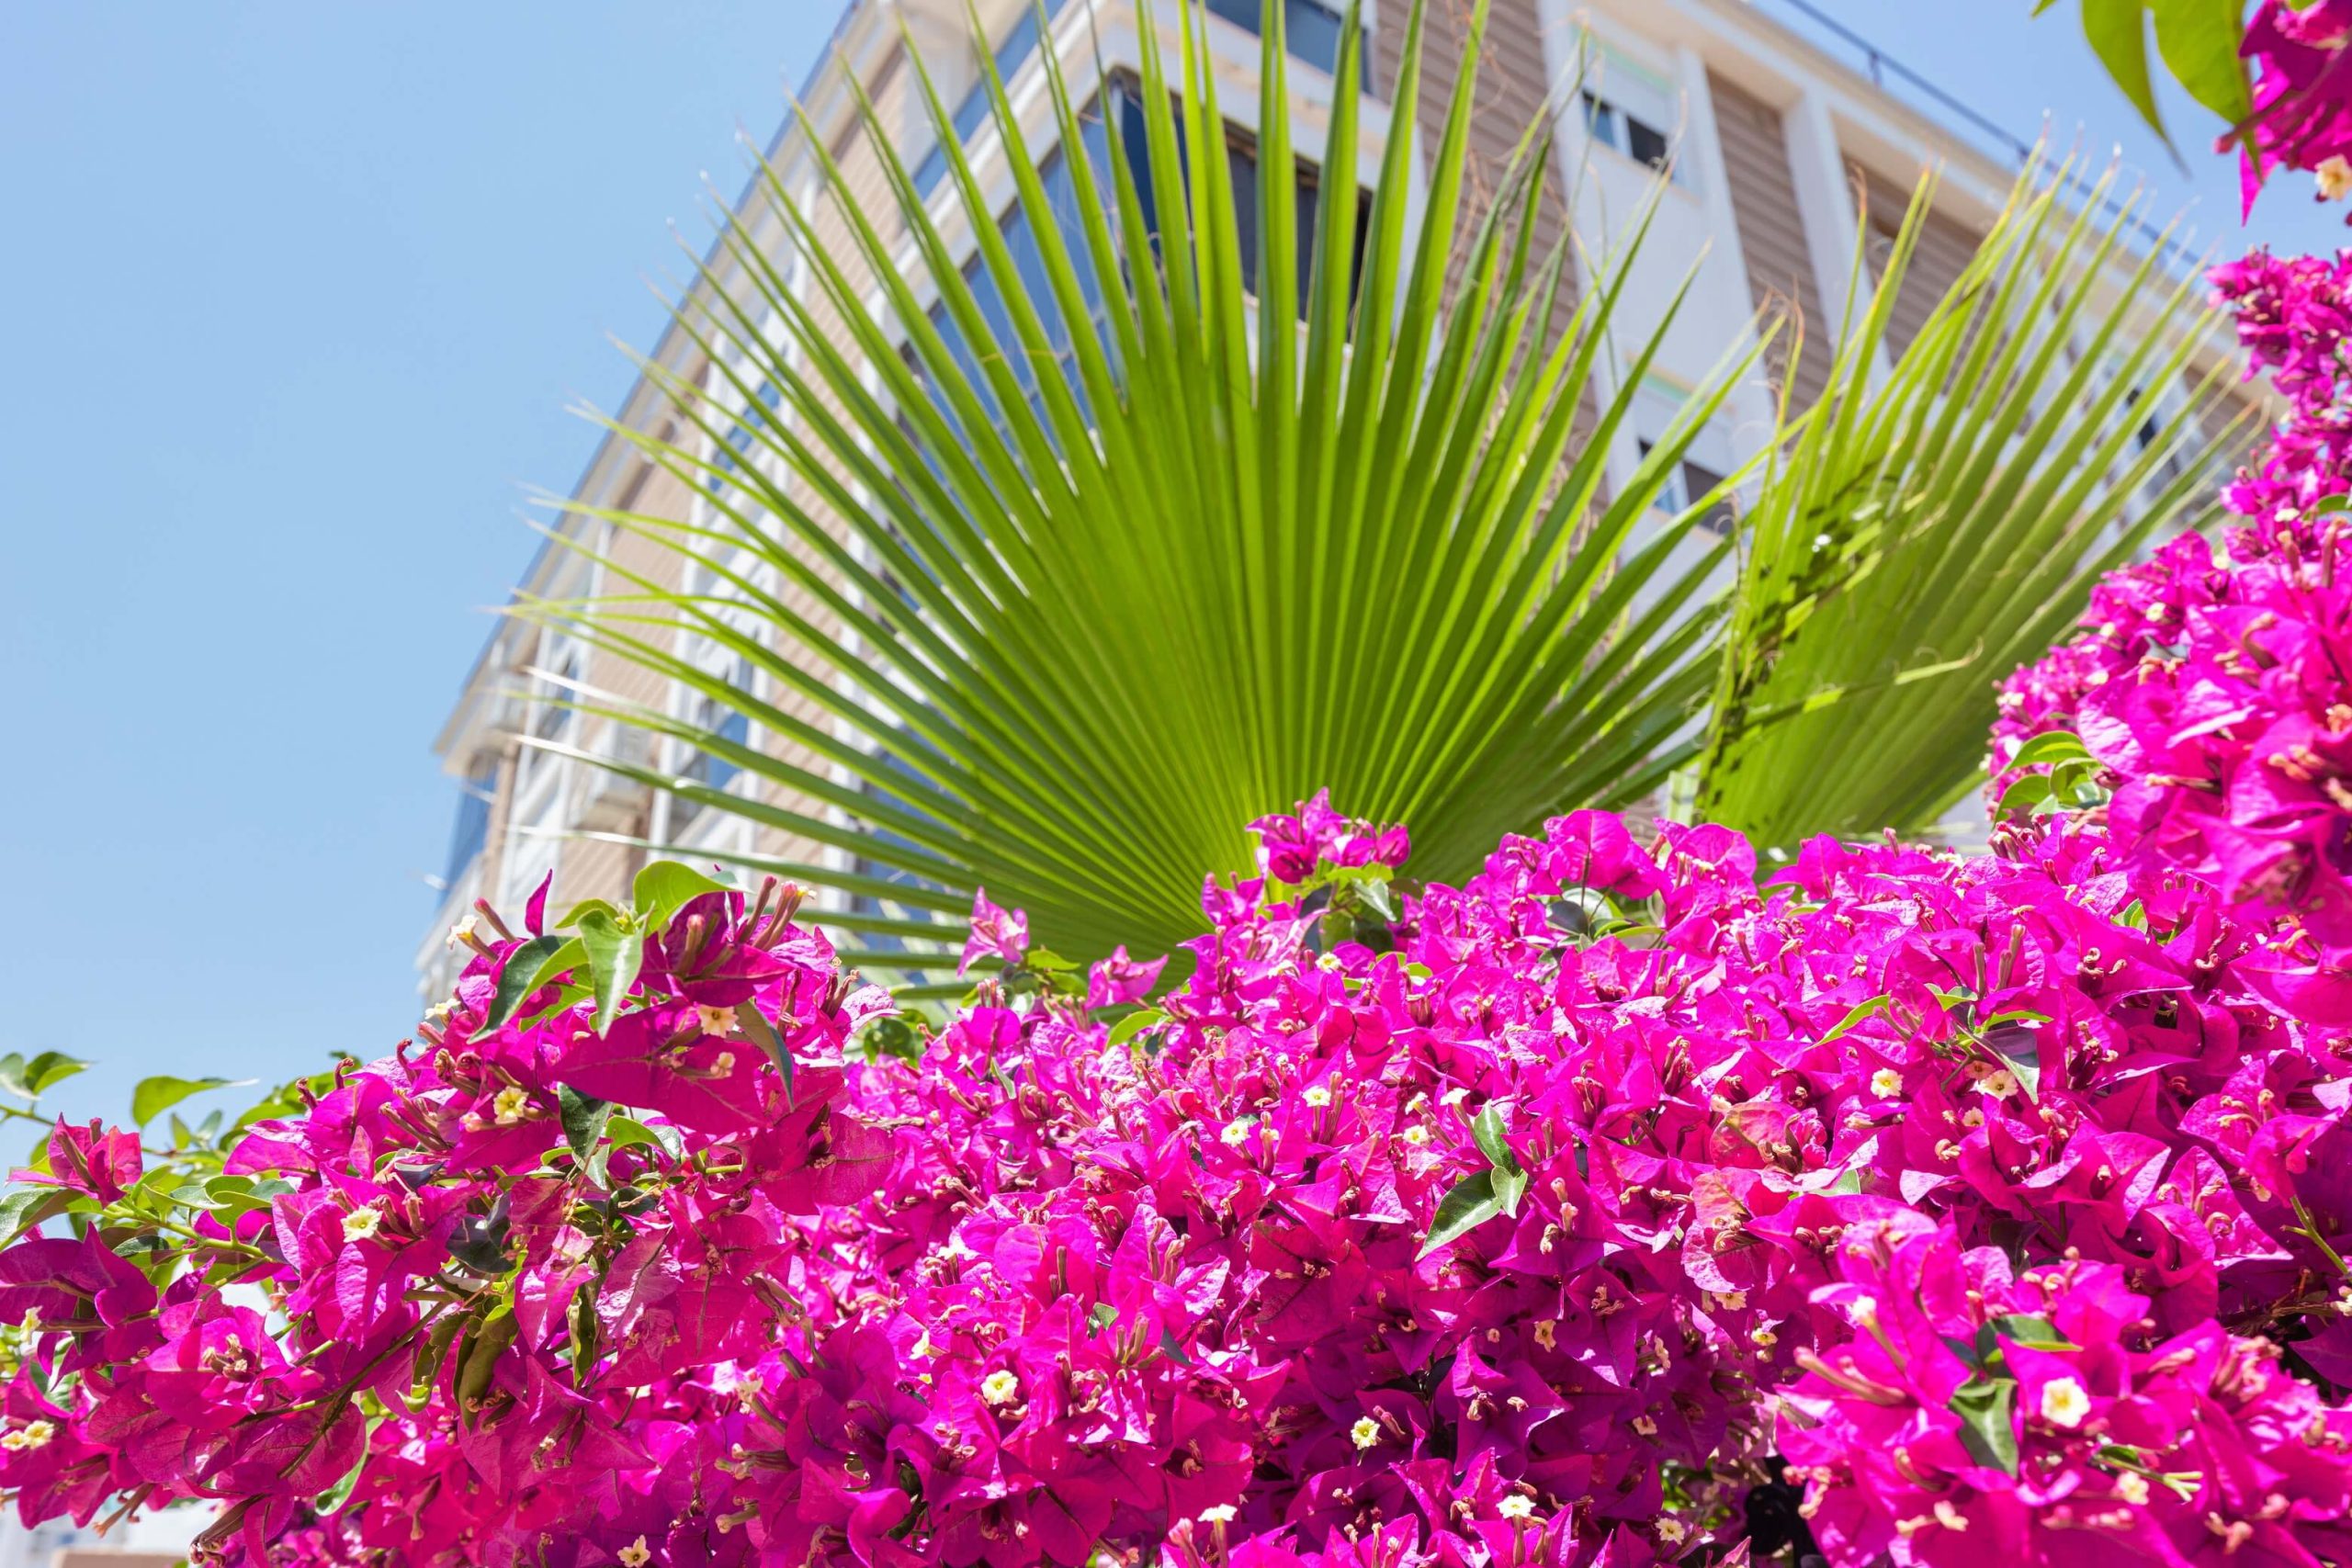 A close up of a flower bush. In the background we can see a palm tree and a condominium building